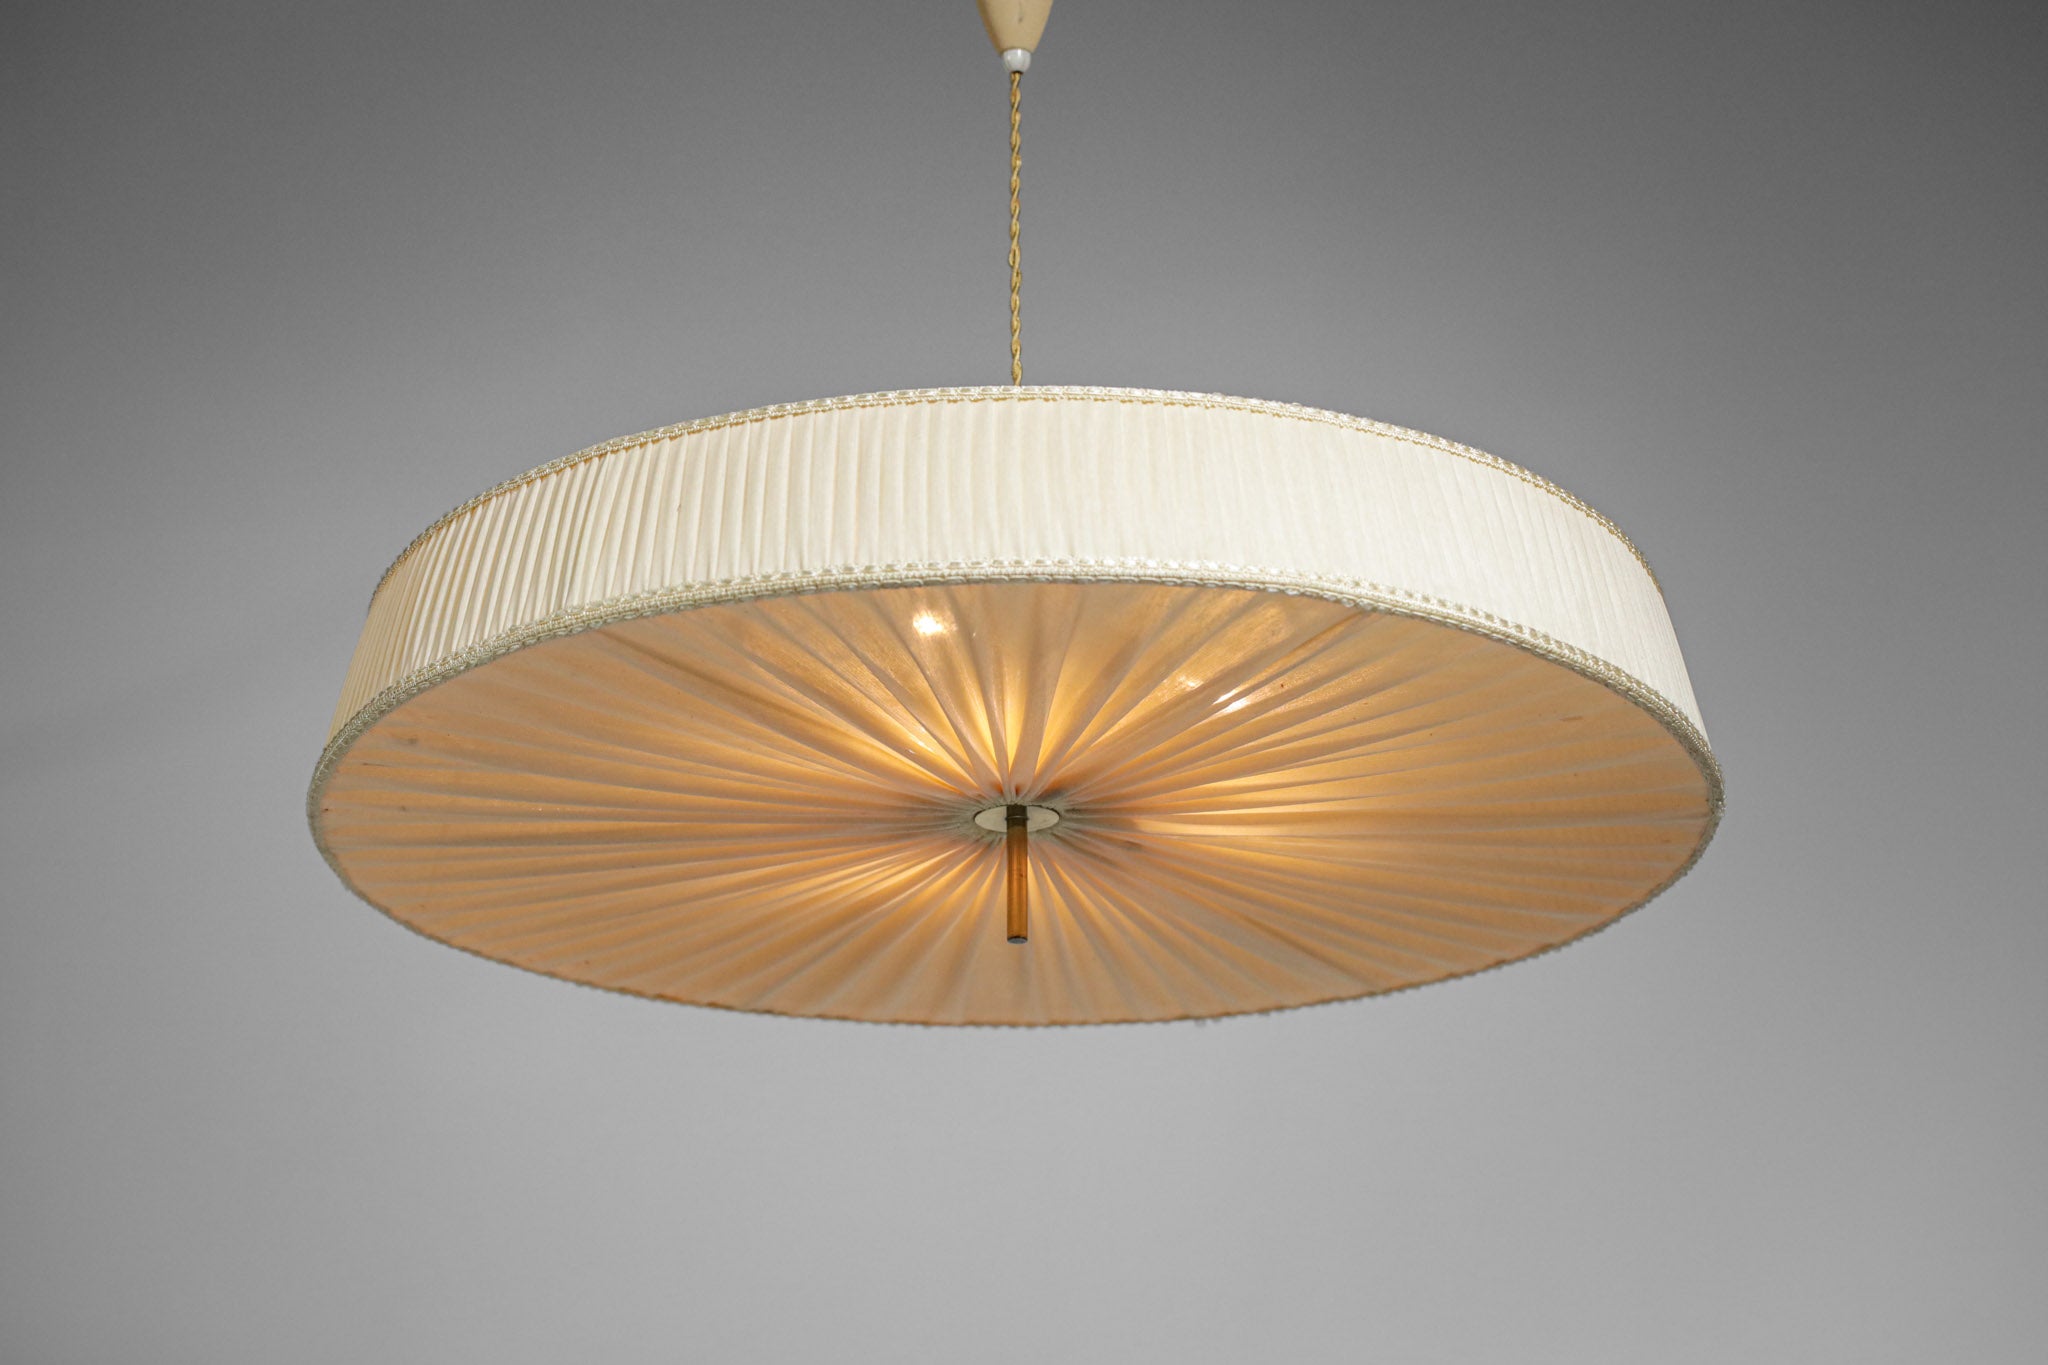 Scandinavian hanging lamp from the 1950s with a rise and fall system in beige lacquered metal with vermiculated paint. Original pleated fabric shade, ceiling attachment and solid brass centre. Very nice detail of the perforated metal star on the top